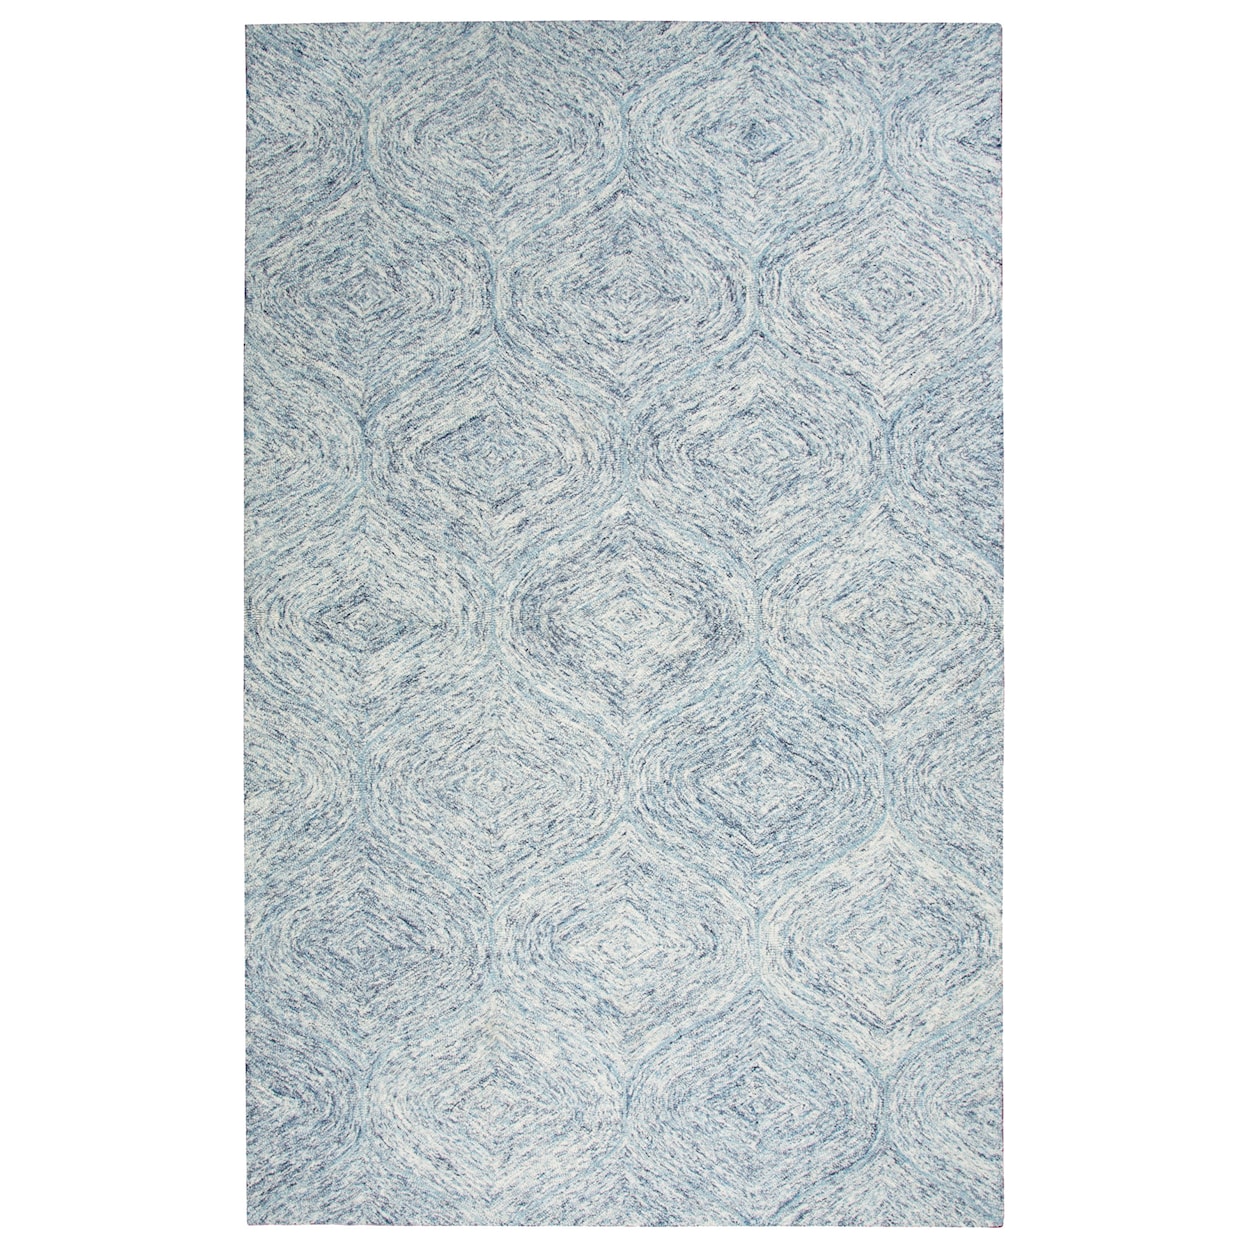 Rizzy Home Brindleton 8' x 10' Rectangle Rug